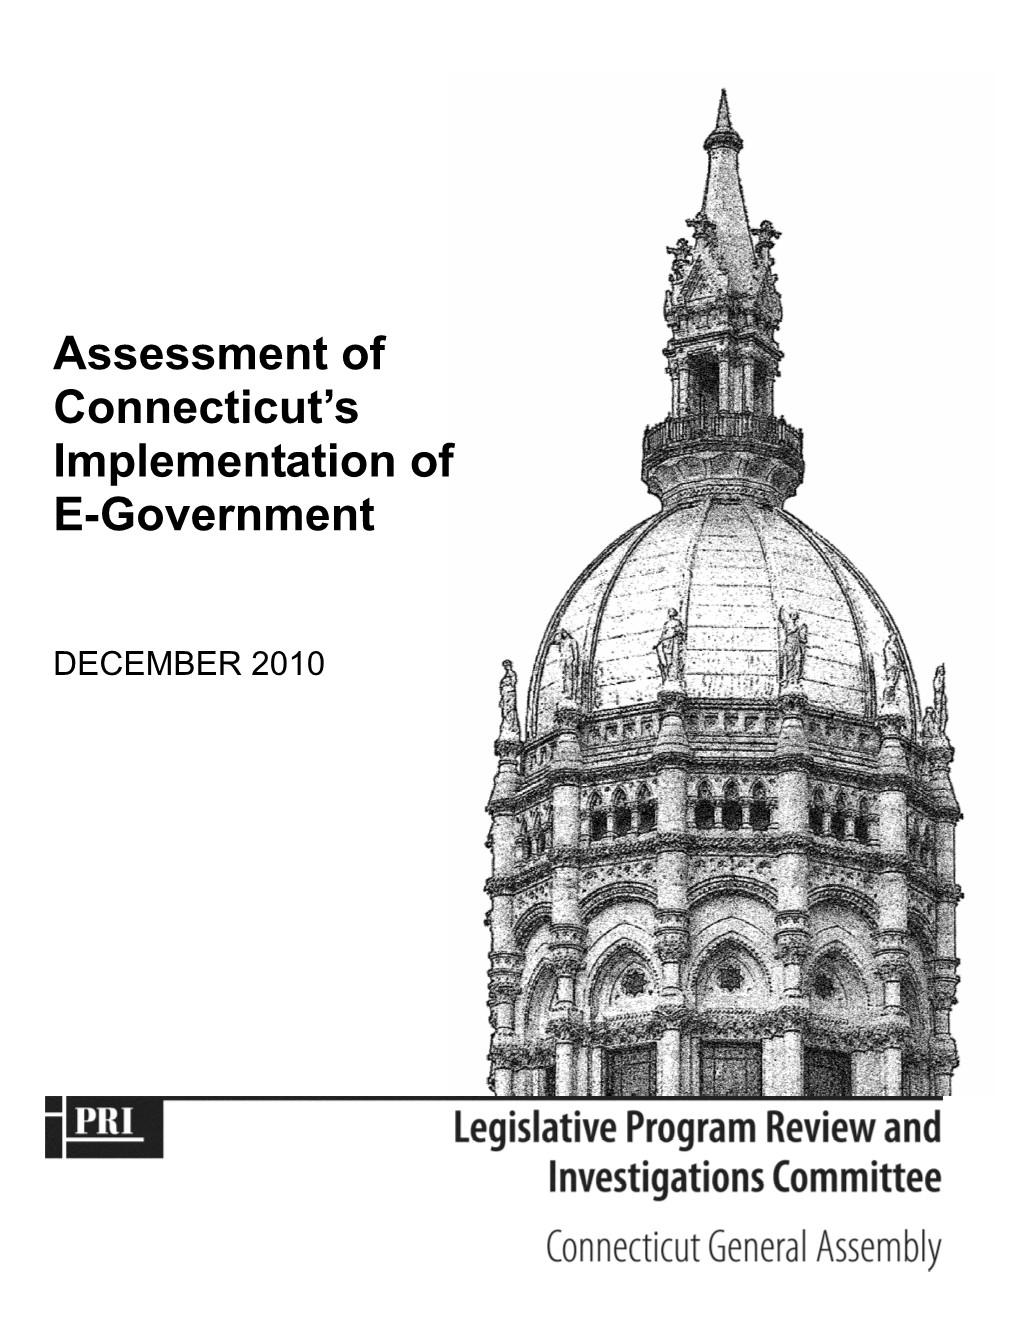 Assessment of Connecticut's Implementation of E-Government